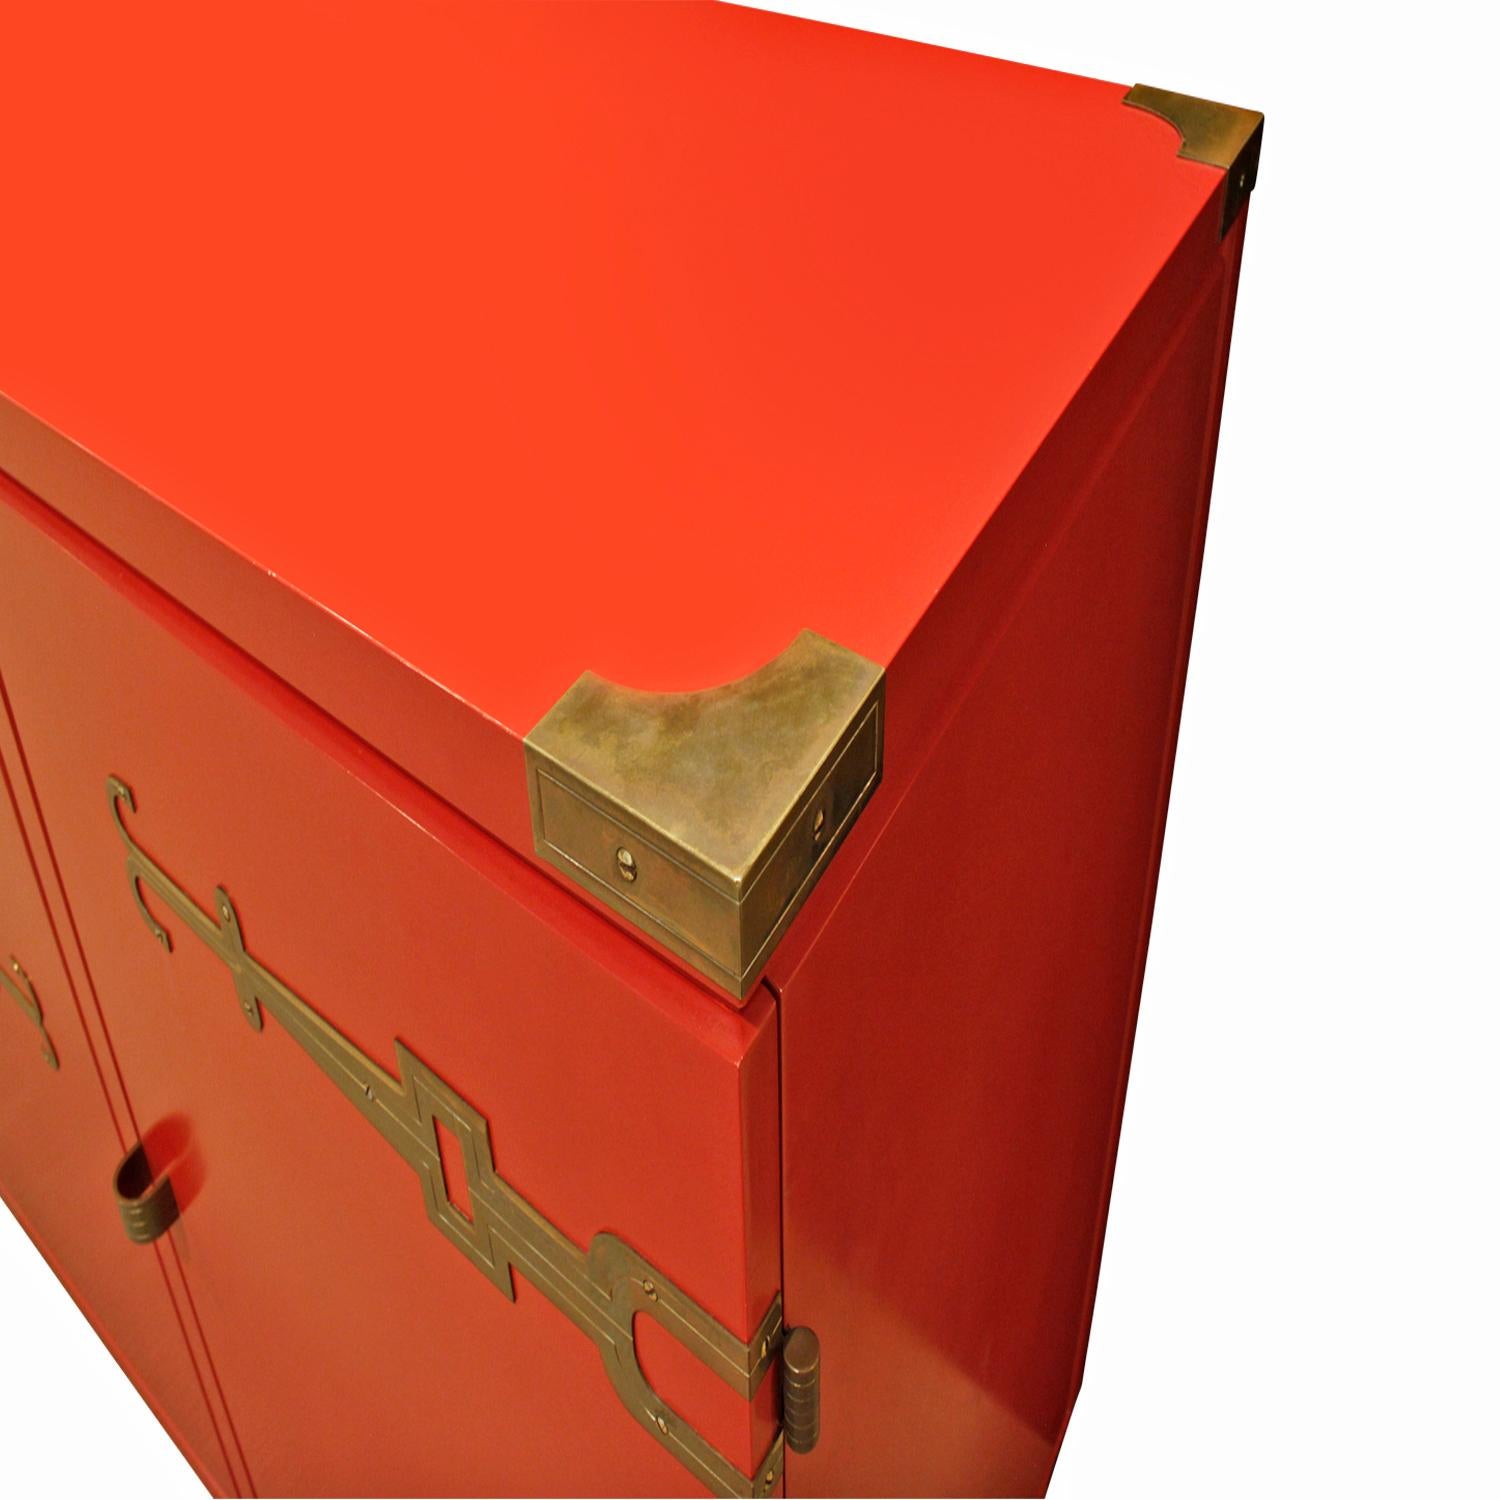 Hand-Crafted Tommi Parzinger 4 Door Chinese Red Cabinet With Iconic Hardware 1950s